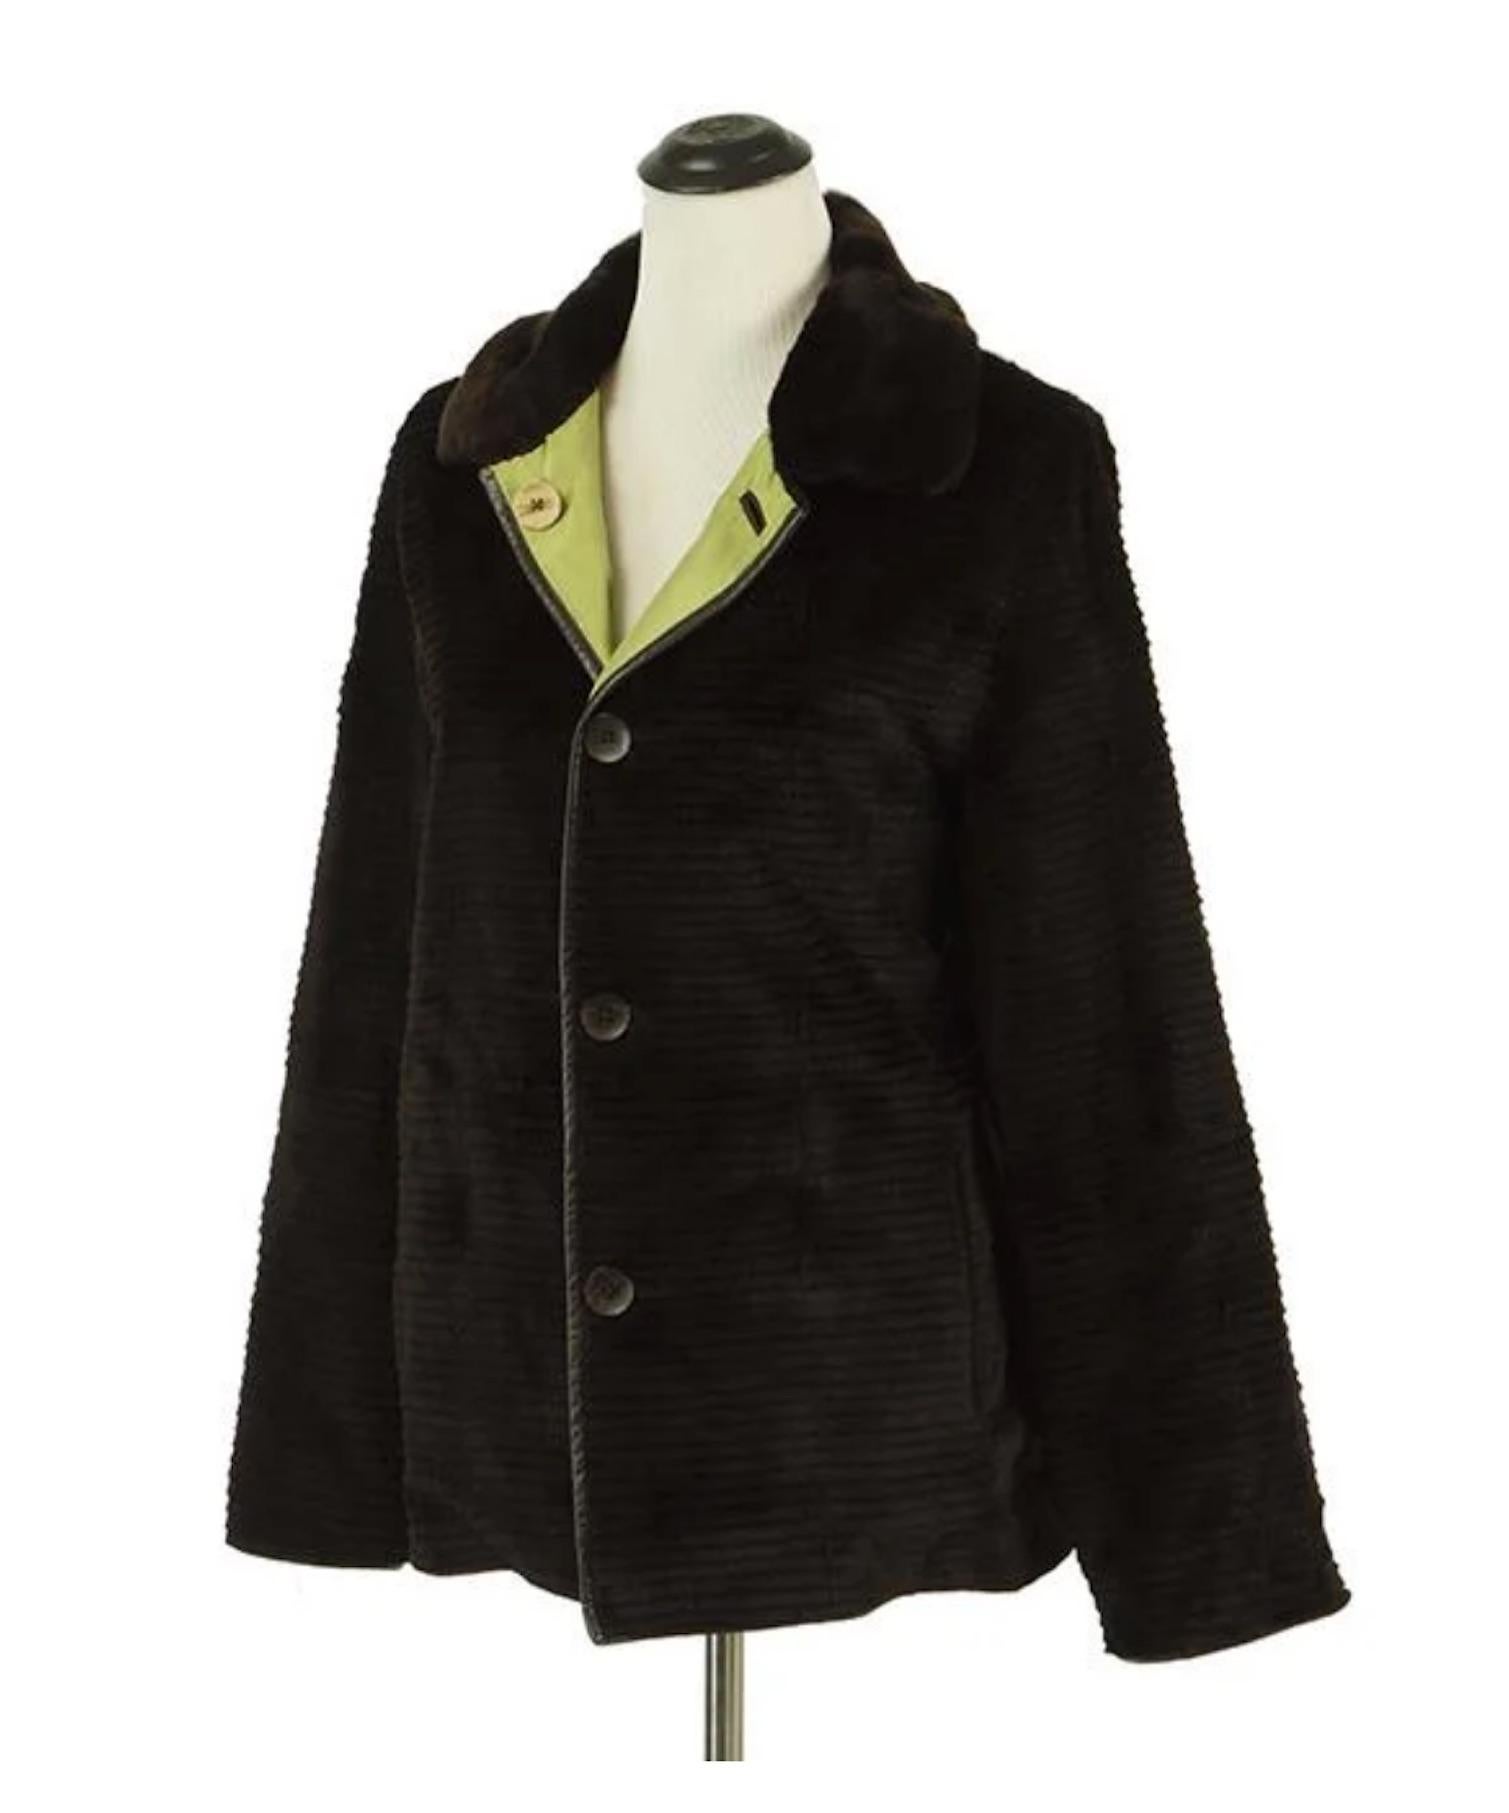 A TRILOGY JACKET.

Reversible green nylon and black leather jacket with a rabbit fur collar reverses to tiered sheared rabbit with jacket with slash pockets

Approximately a size 12